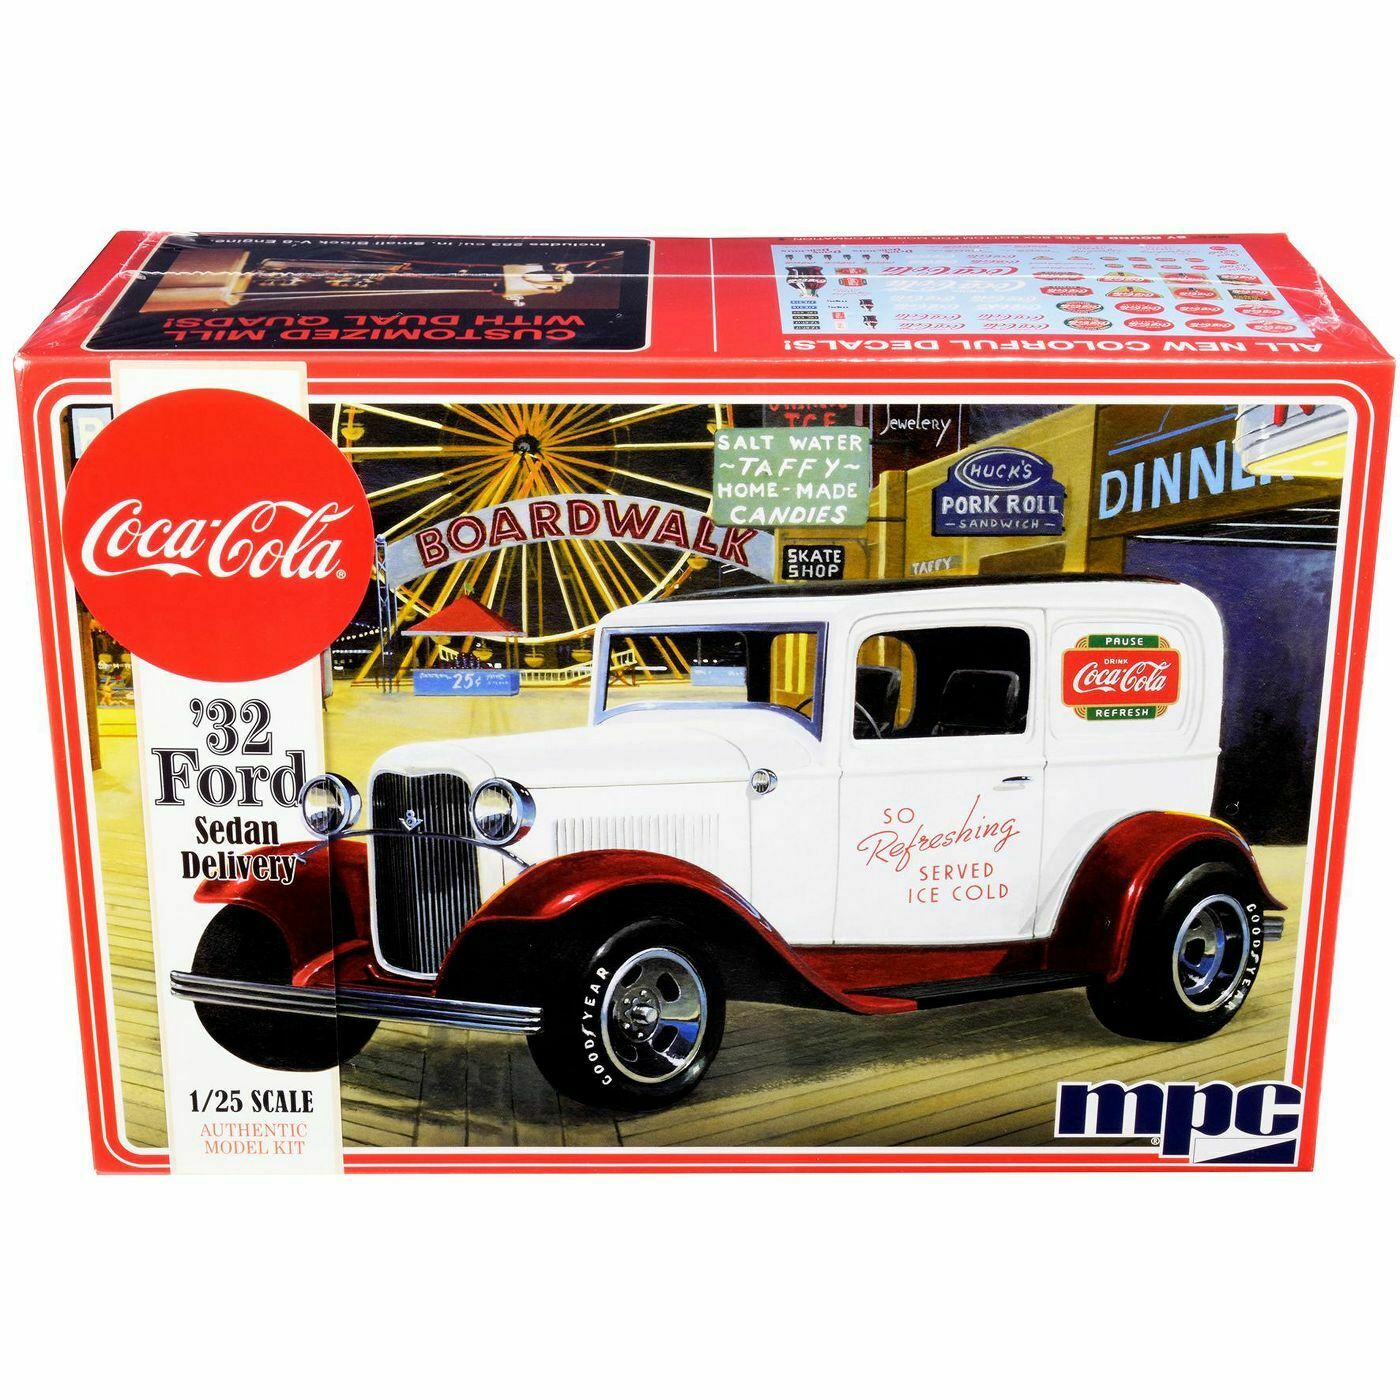 MPC 902/12 1/25 1932 Ford Sedan Delivery Truck